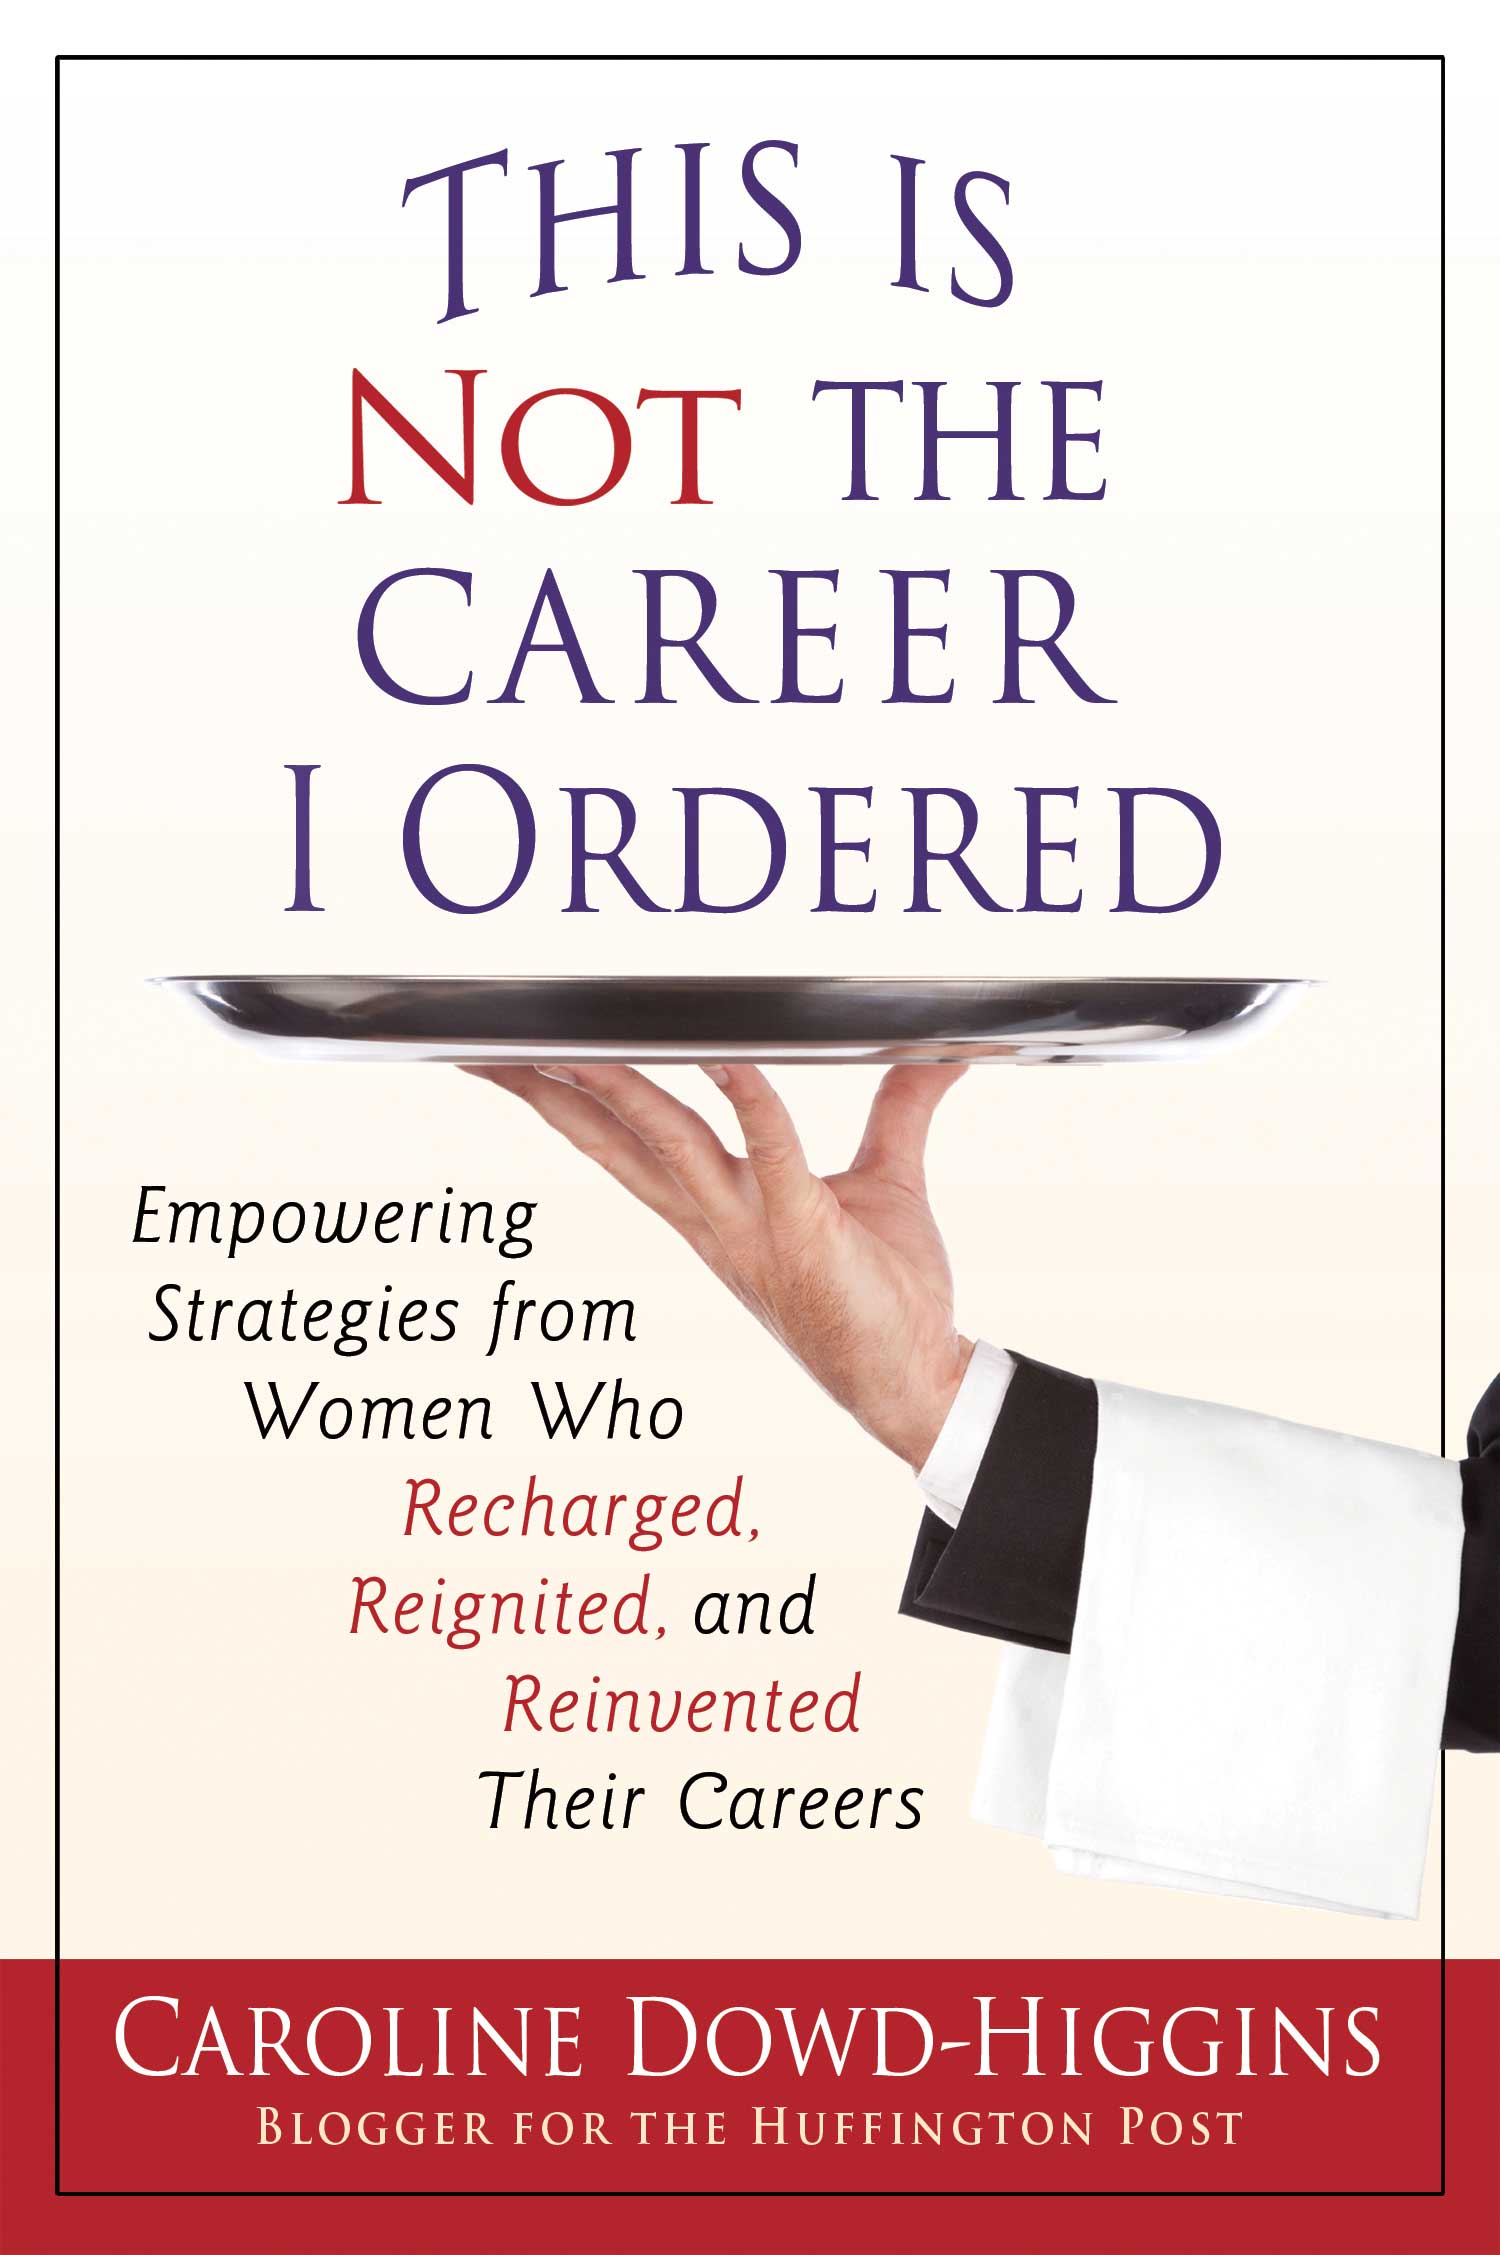 This Is Not the Career I Ordered: Empowering Strategies from Women Who Recharged, Reignited, and Reinvented Their Careers Caroline Dowd-Higgins